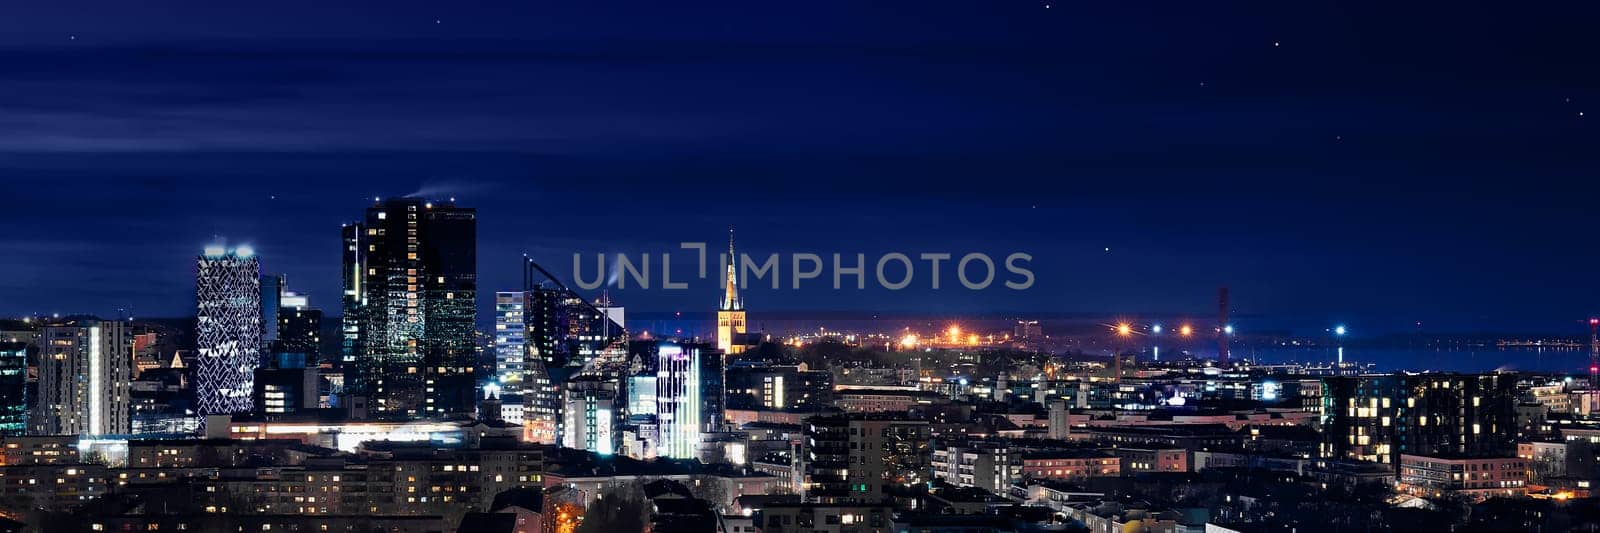 Panoramic view of the city at night. Tallinn, Estonia at night. Sleeping city in a cold winter night